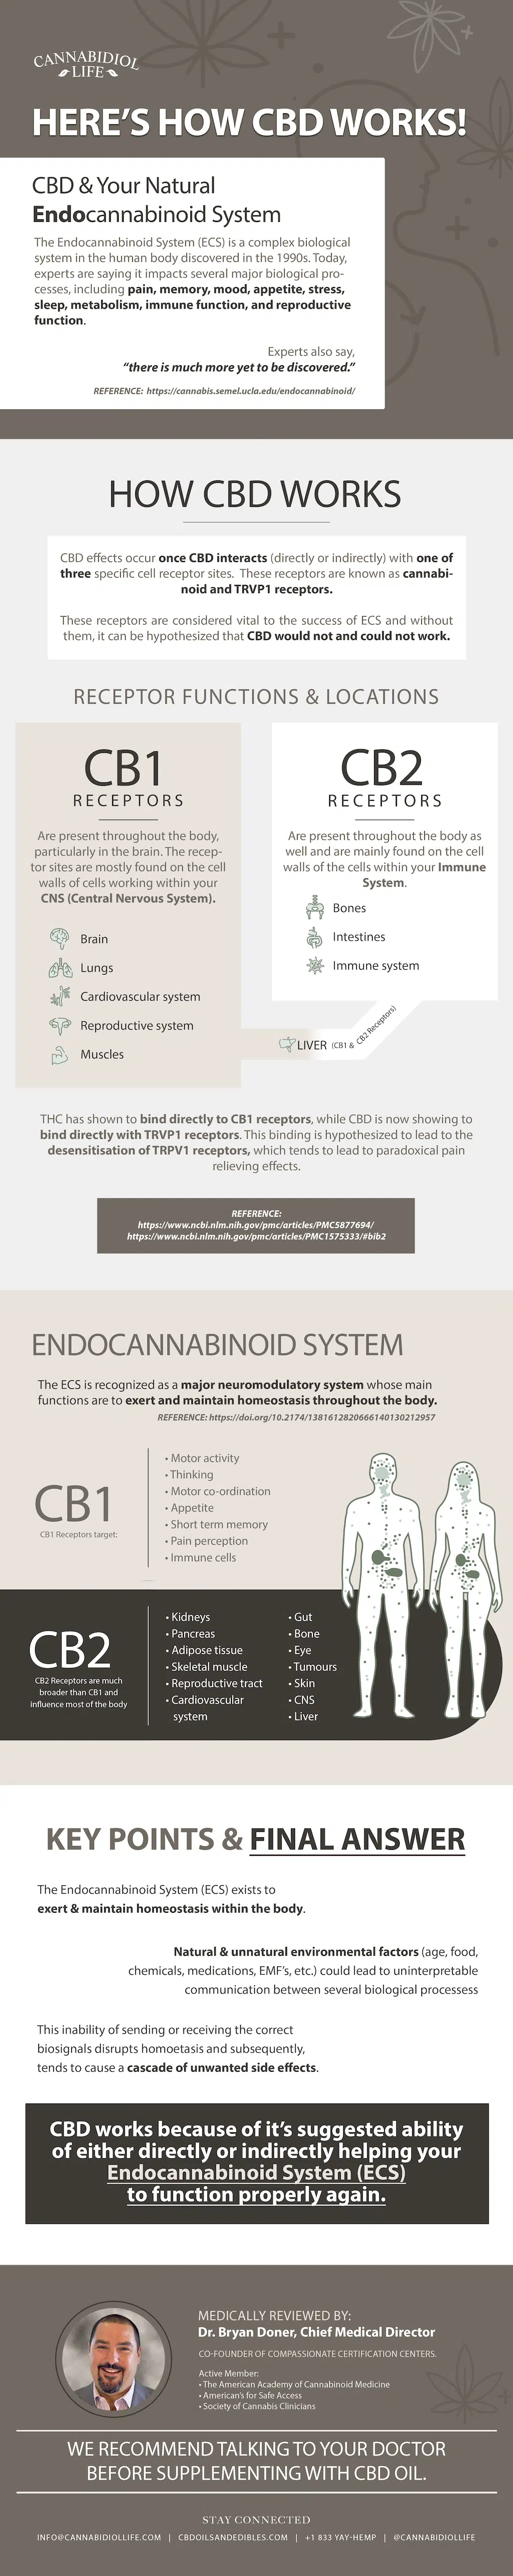 Medical Professional Reviewed Infographic Of How Cbd Works With The Endocannabinoid System.